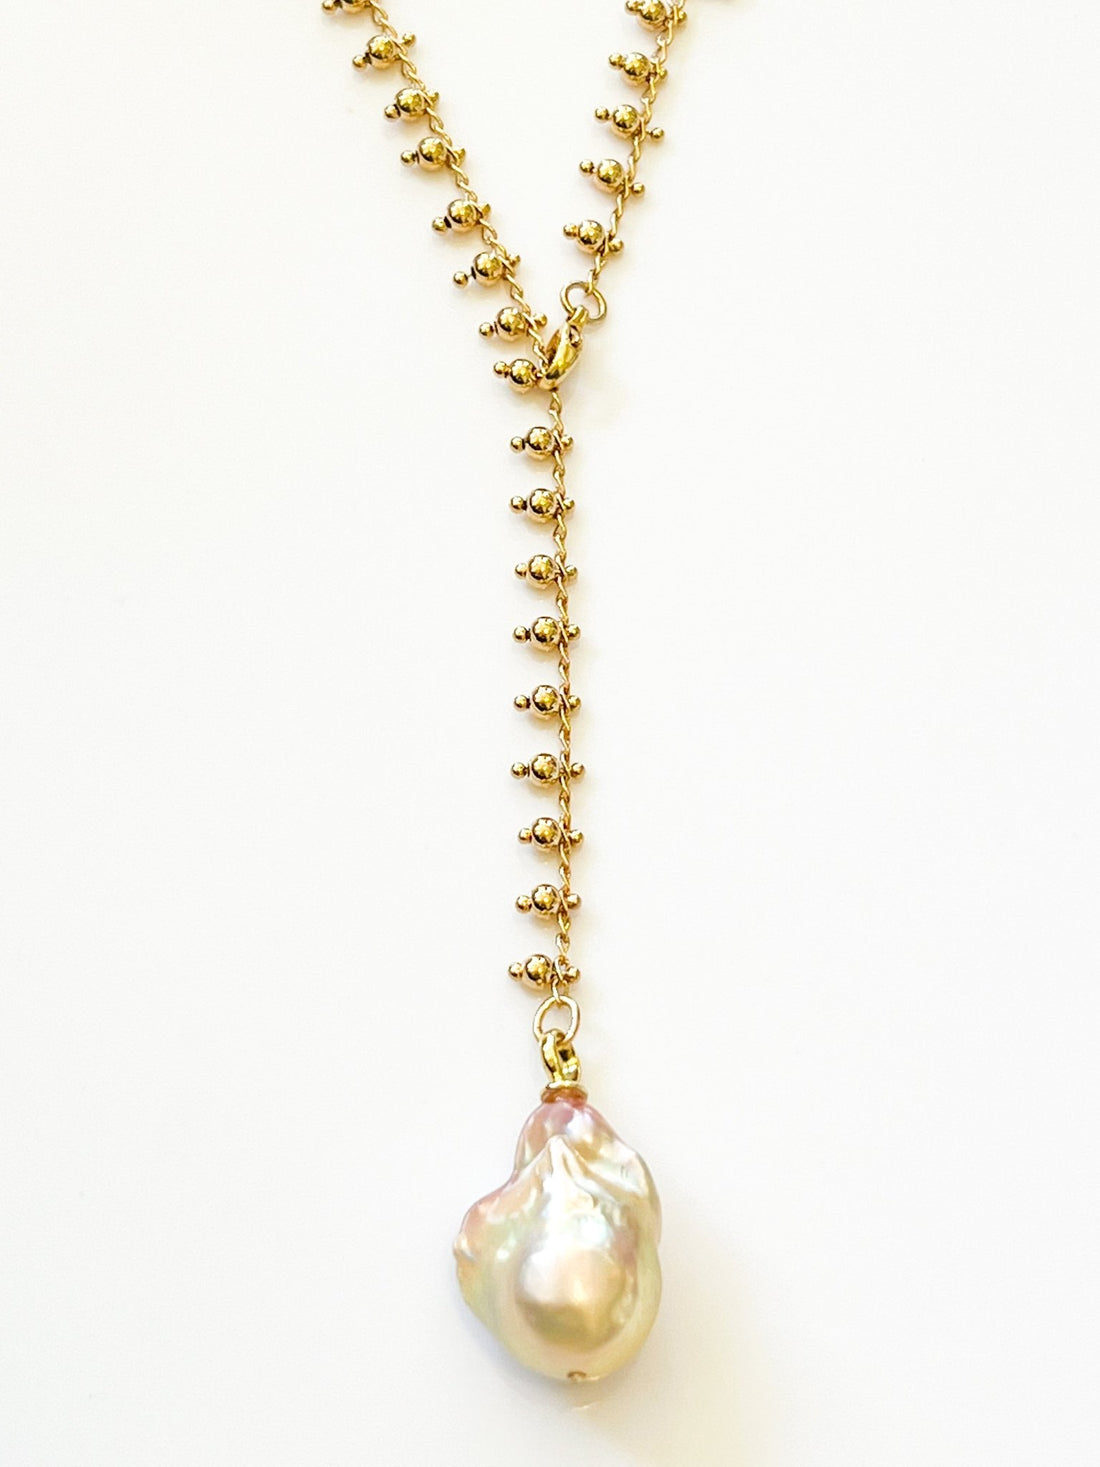 Peach Japanese Keshi Pearl Necklace on Gold Ball Charm Chain by Sage Machado - The Sage Lifestyle